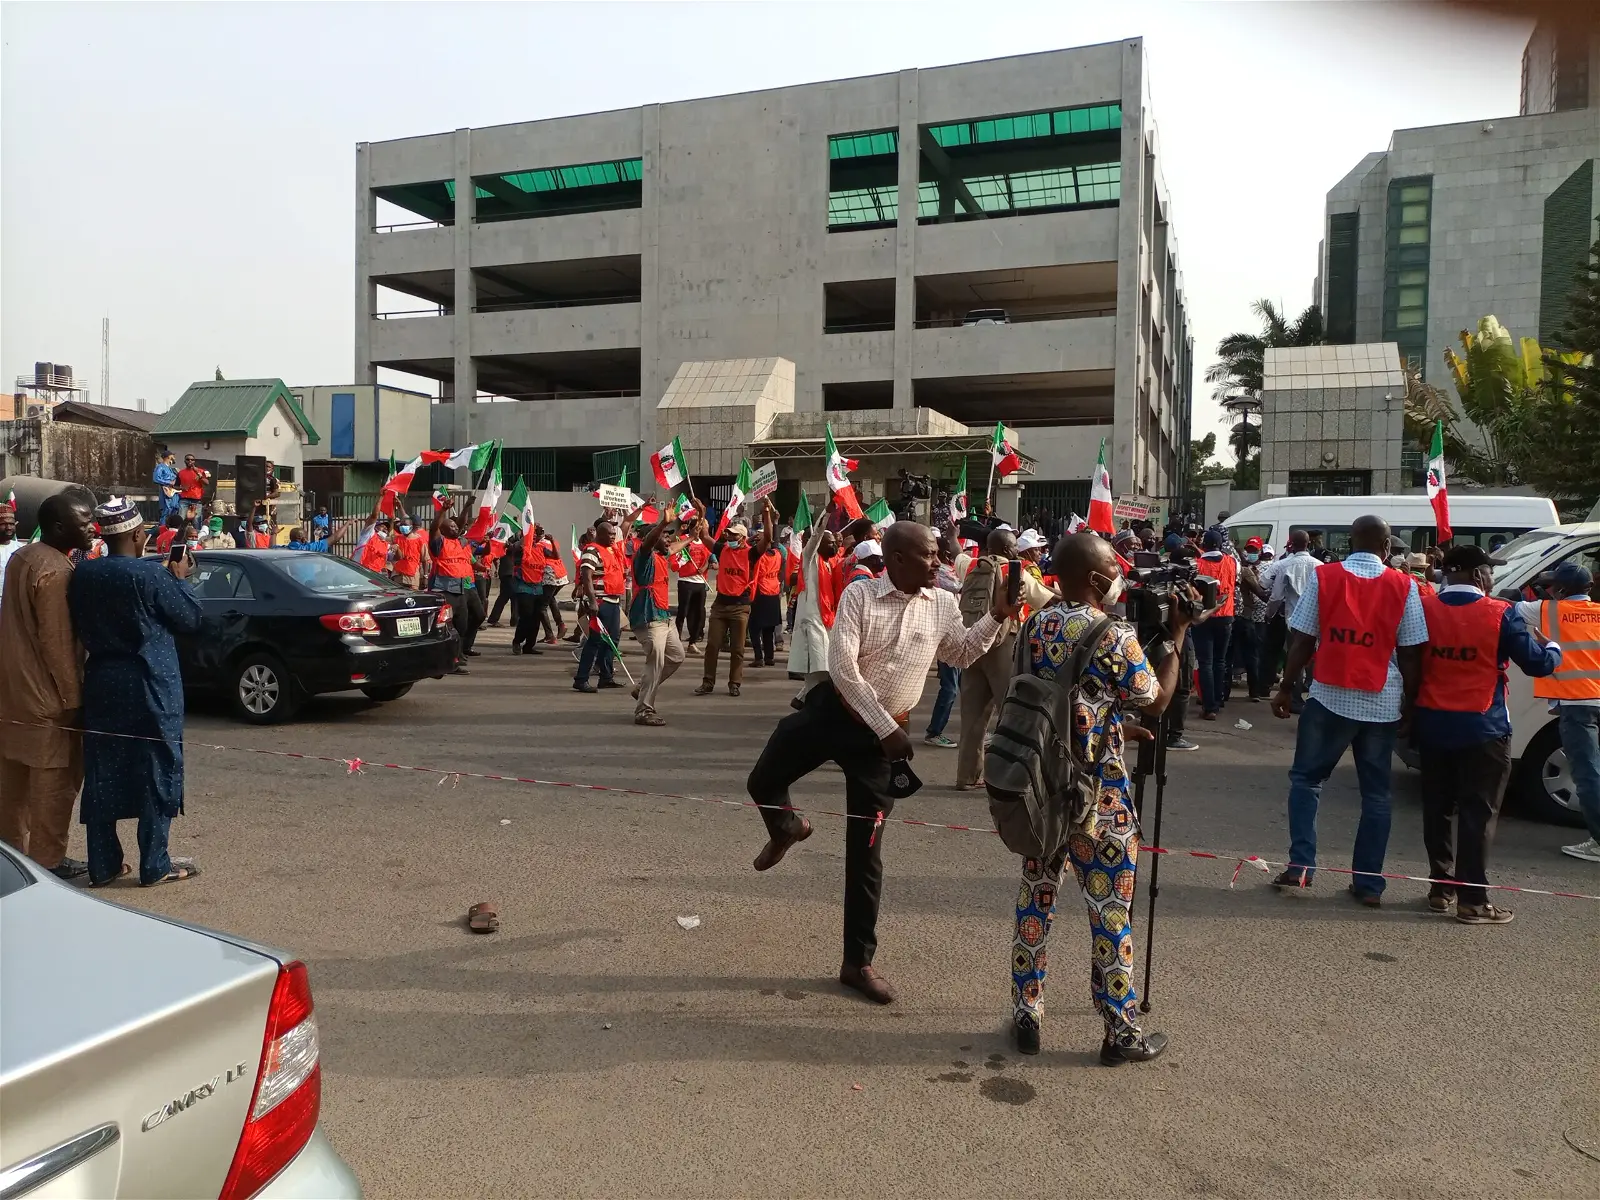 Unyielding: NLC Declares Protest Plans as Negotiations Reach Stalemate